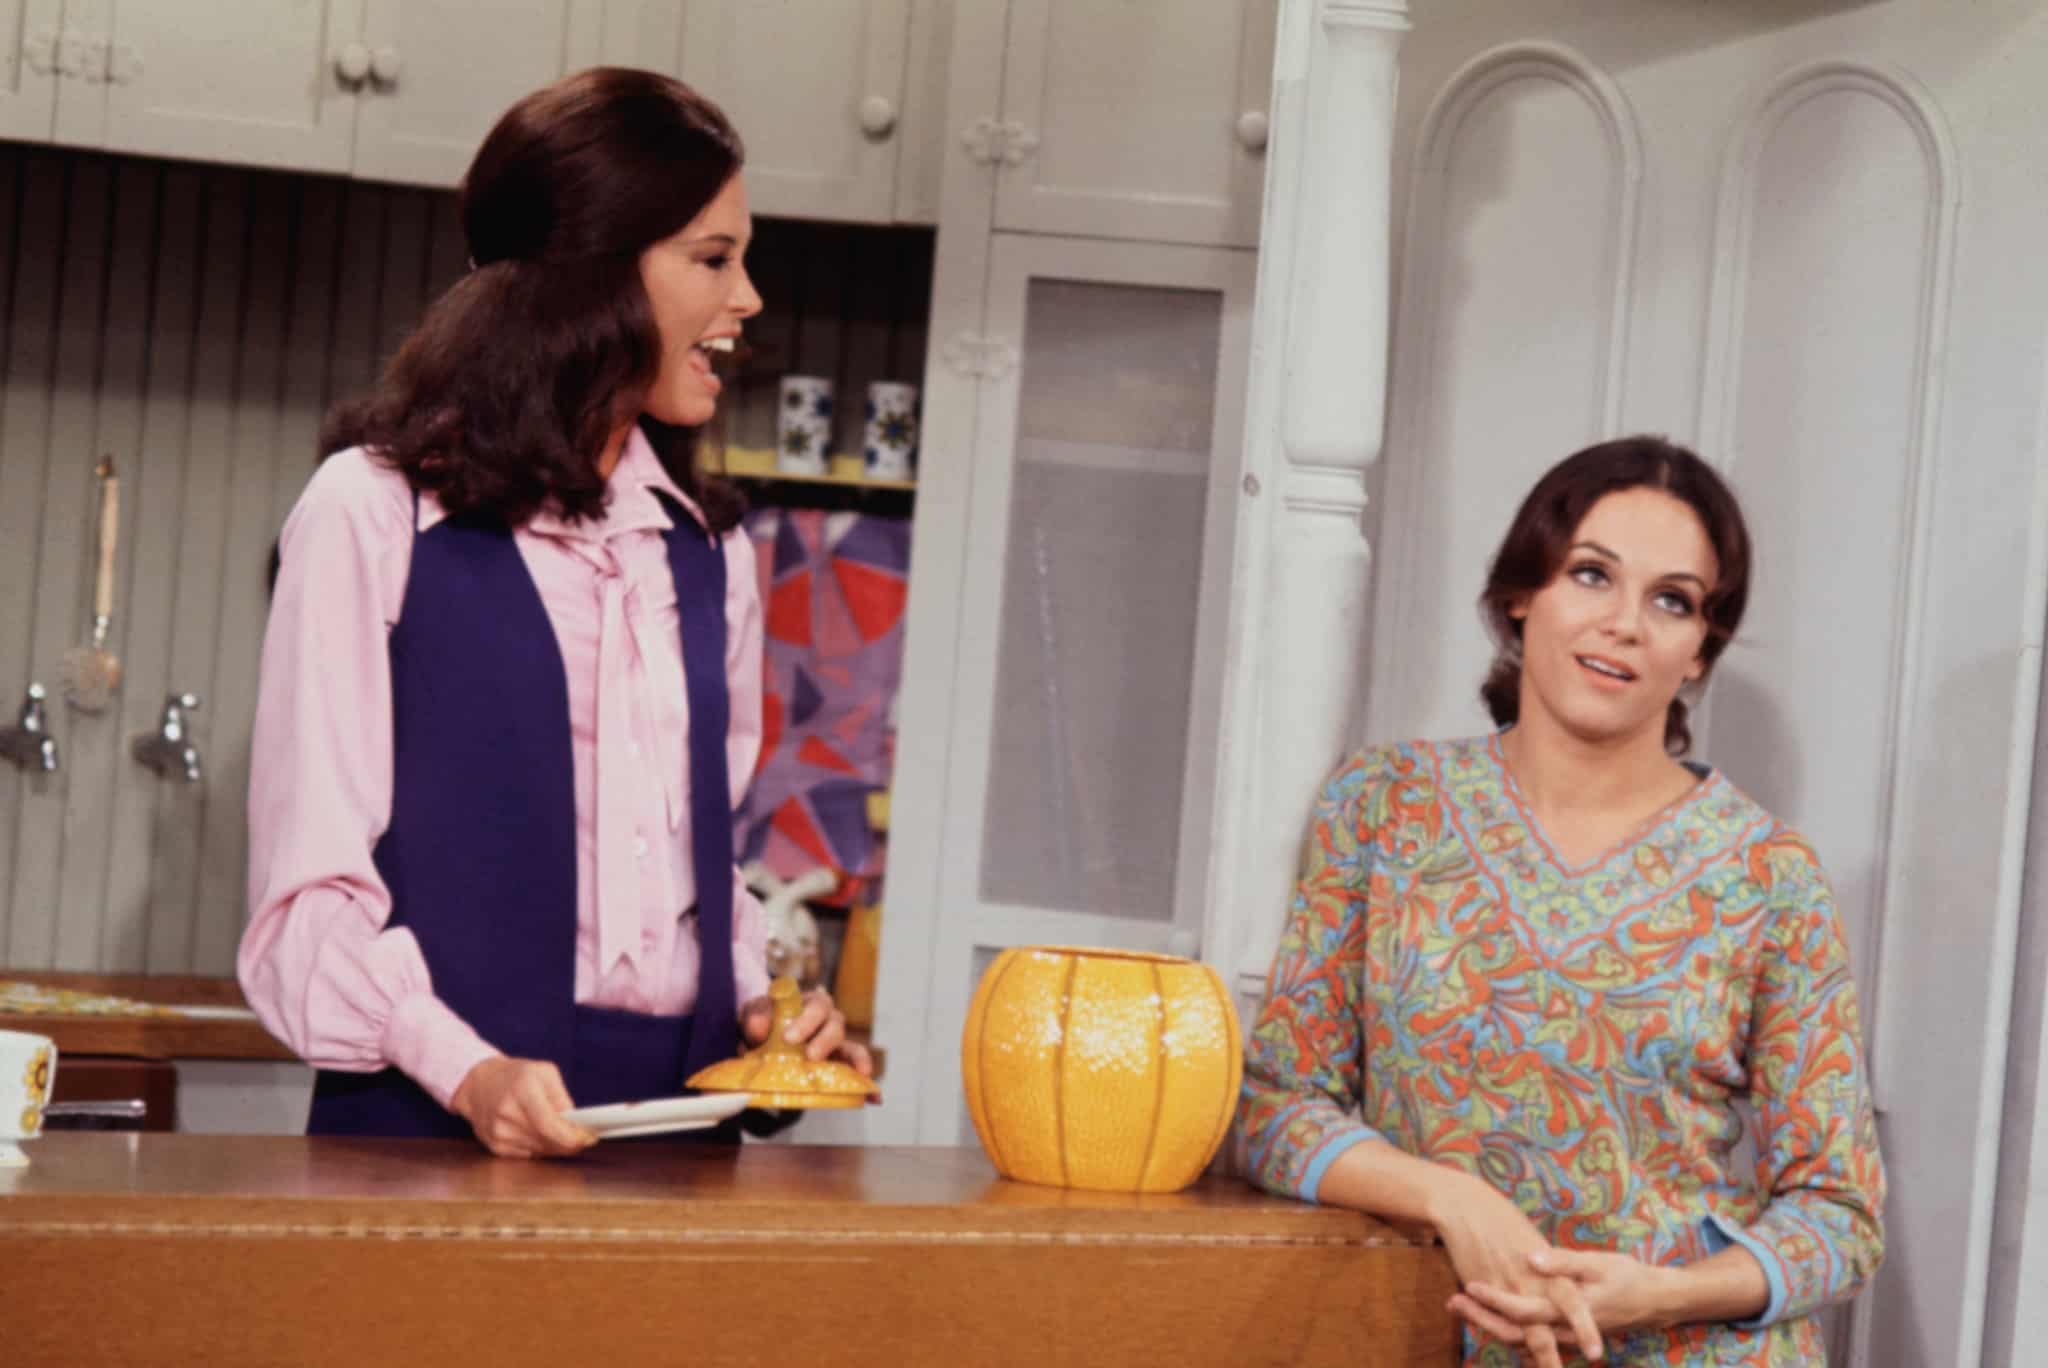 Two women hang out in a kitchen in this image from MTM Enterprises.